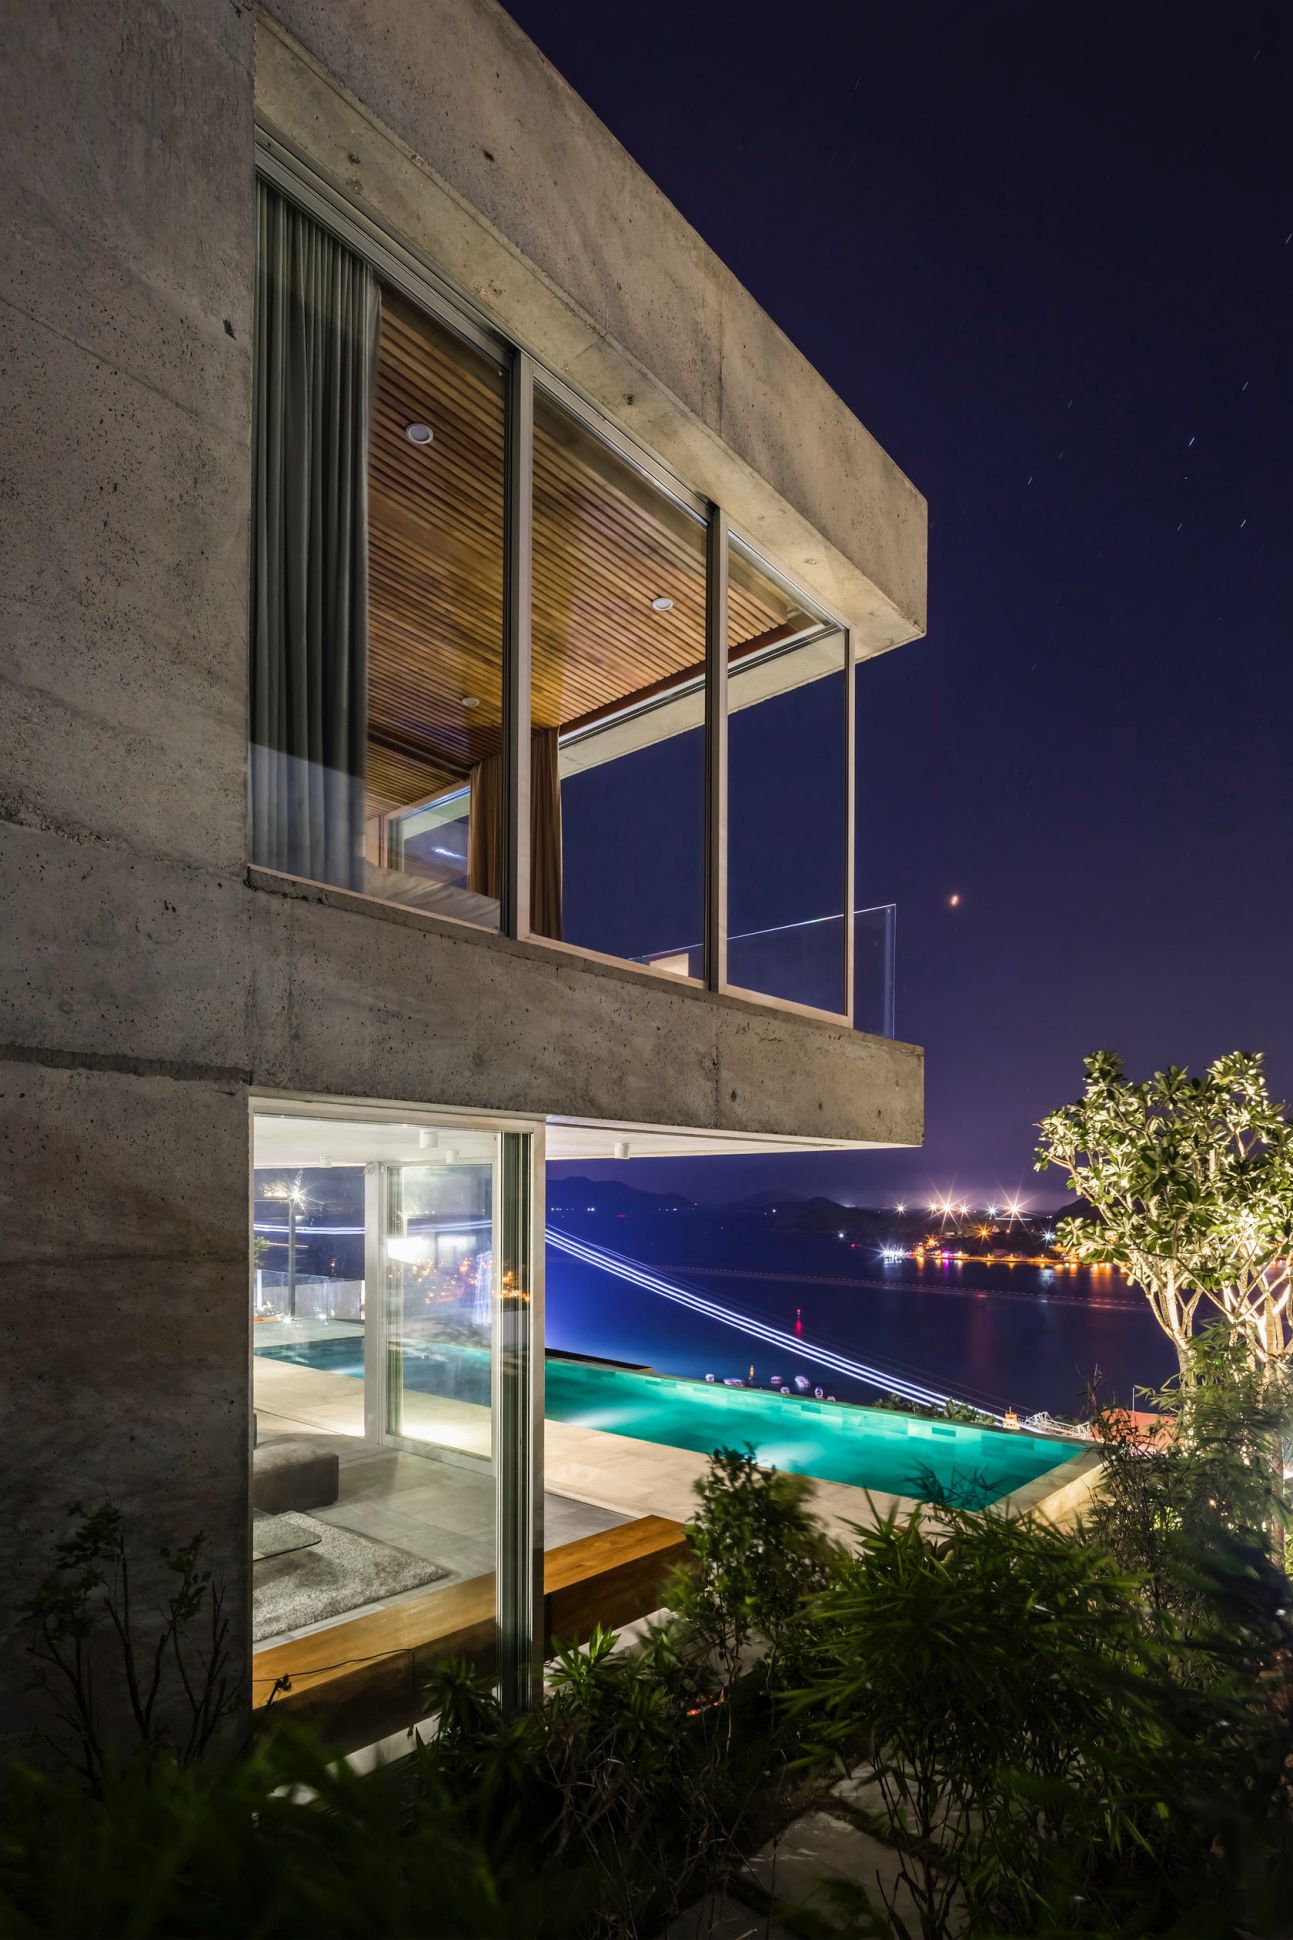 Outstanding-Coastal-Stone-House-in-Nha-Trang-Vietnam-by-MM-Architects-14